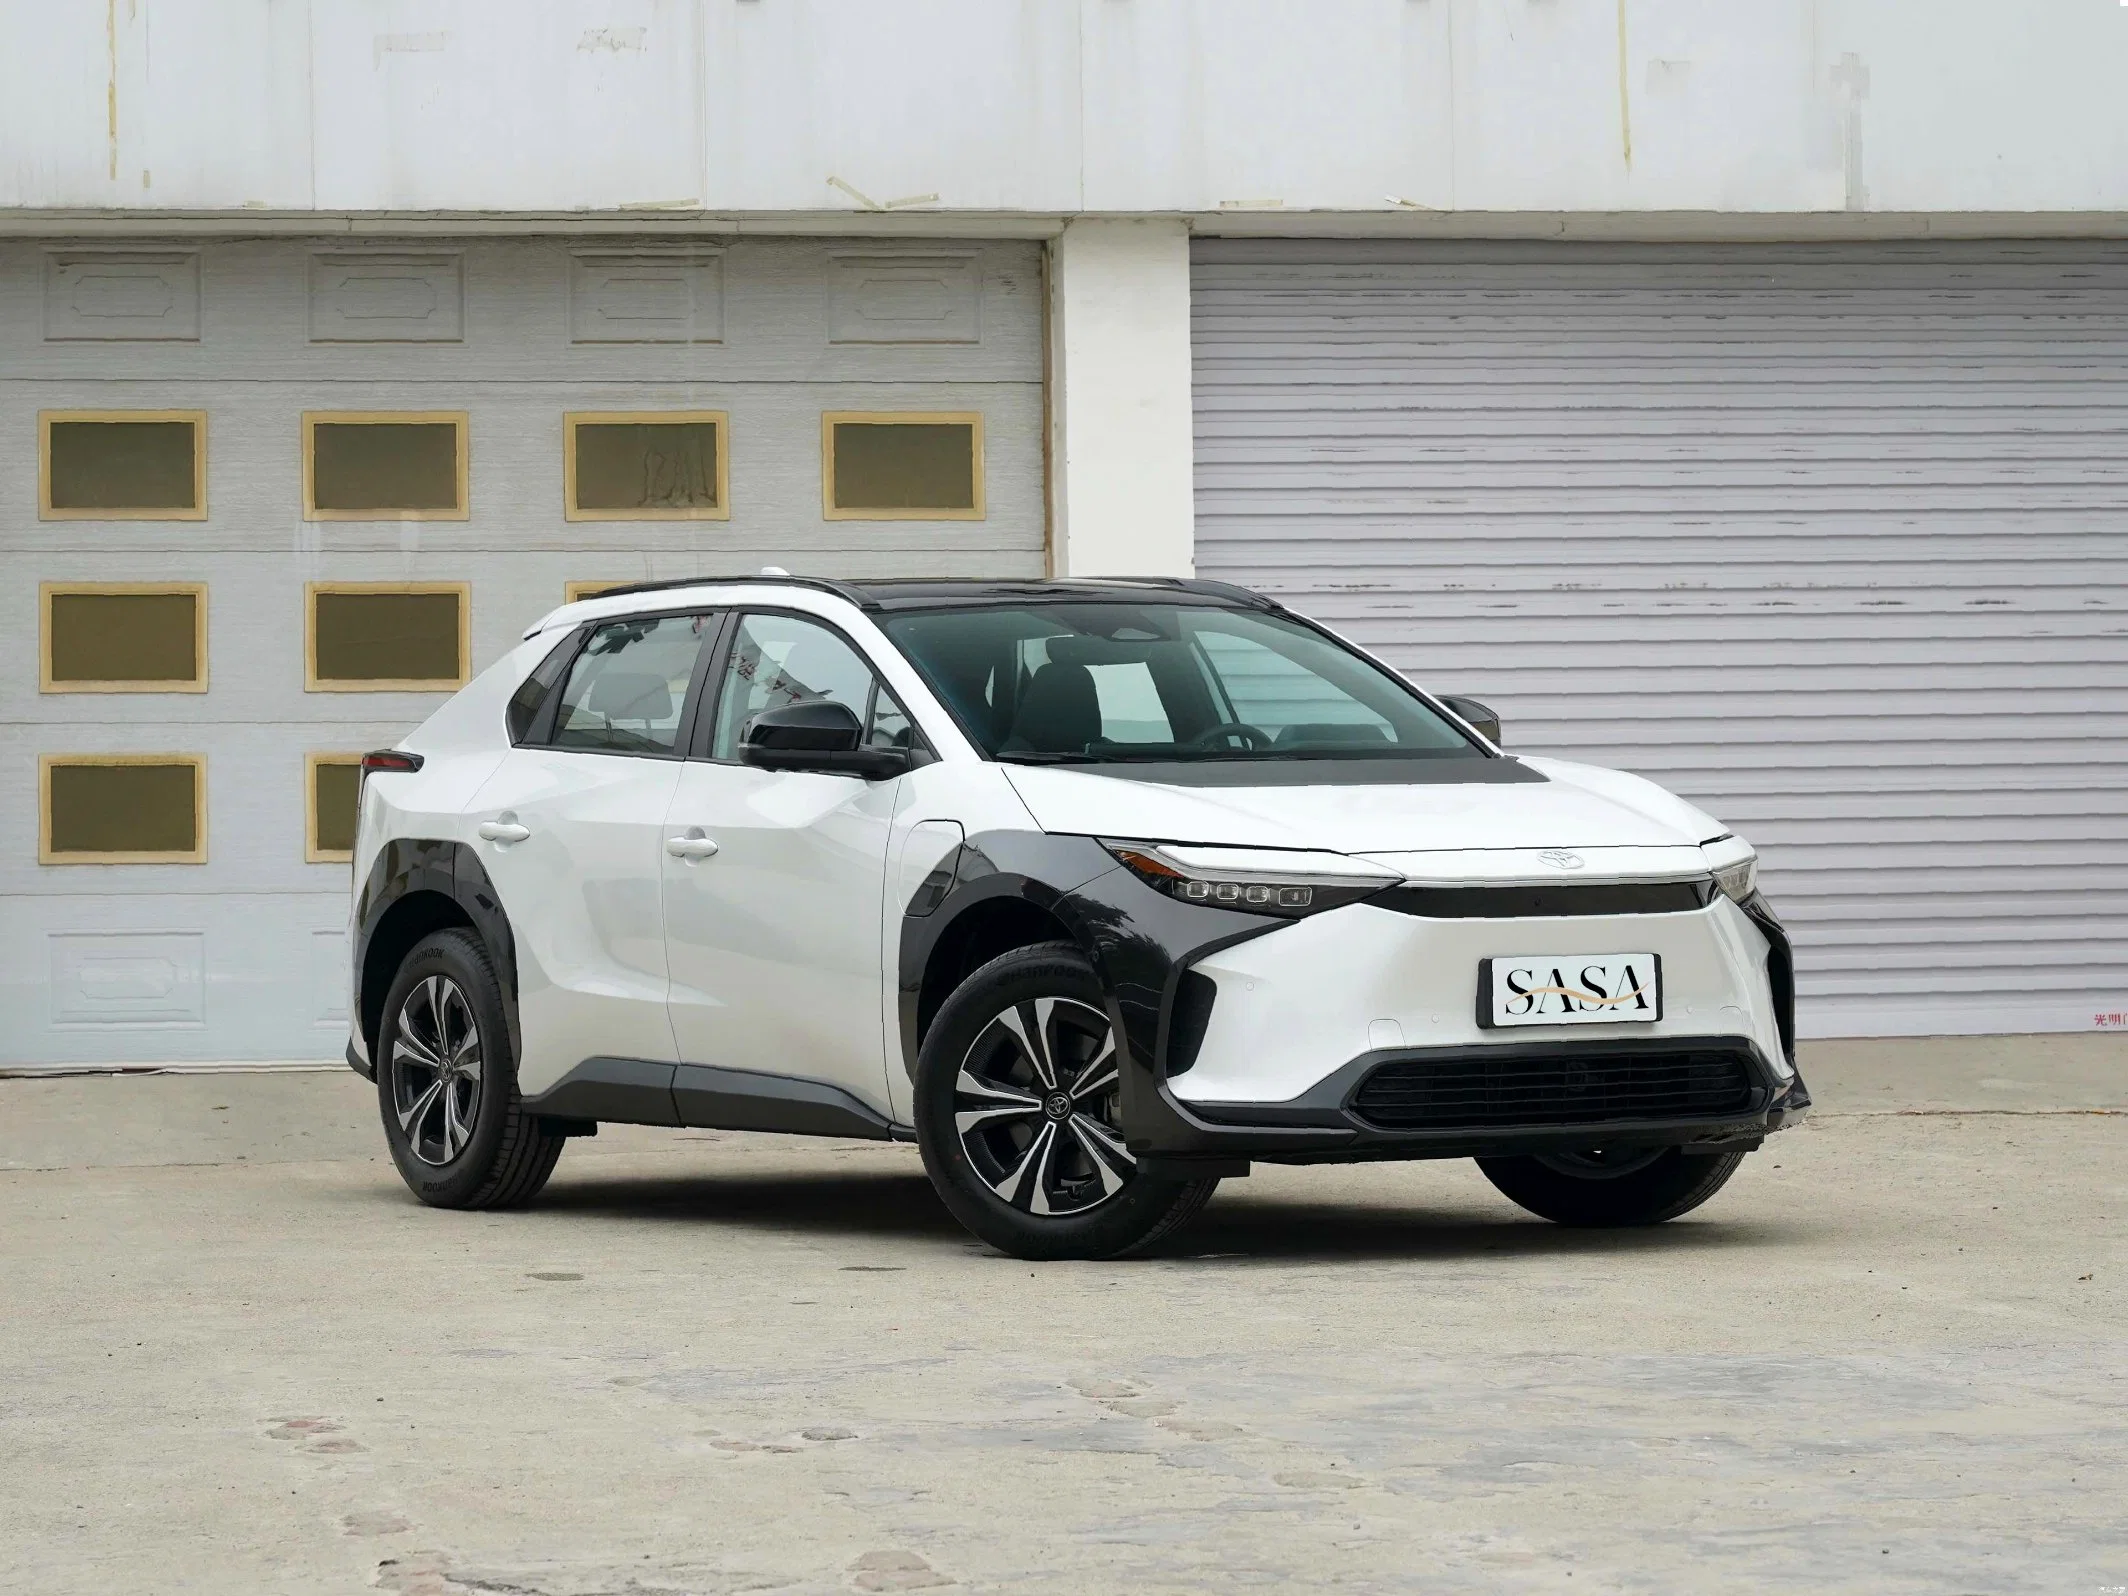 Toyota Bz4X Used Car Japanese Electric Vehicle New Energy Vehicle Electric Car for Adult with High Quality